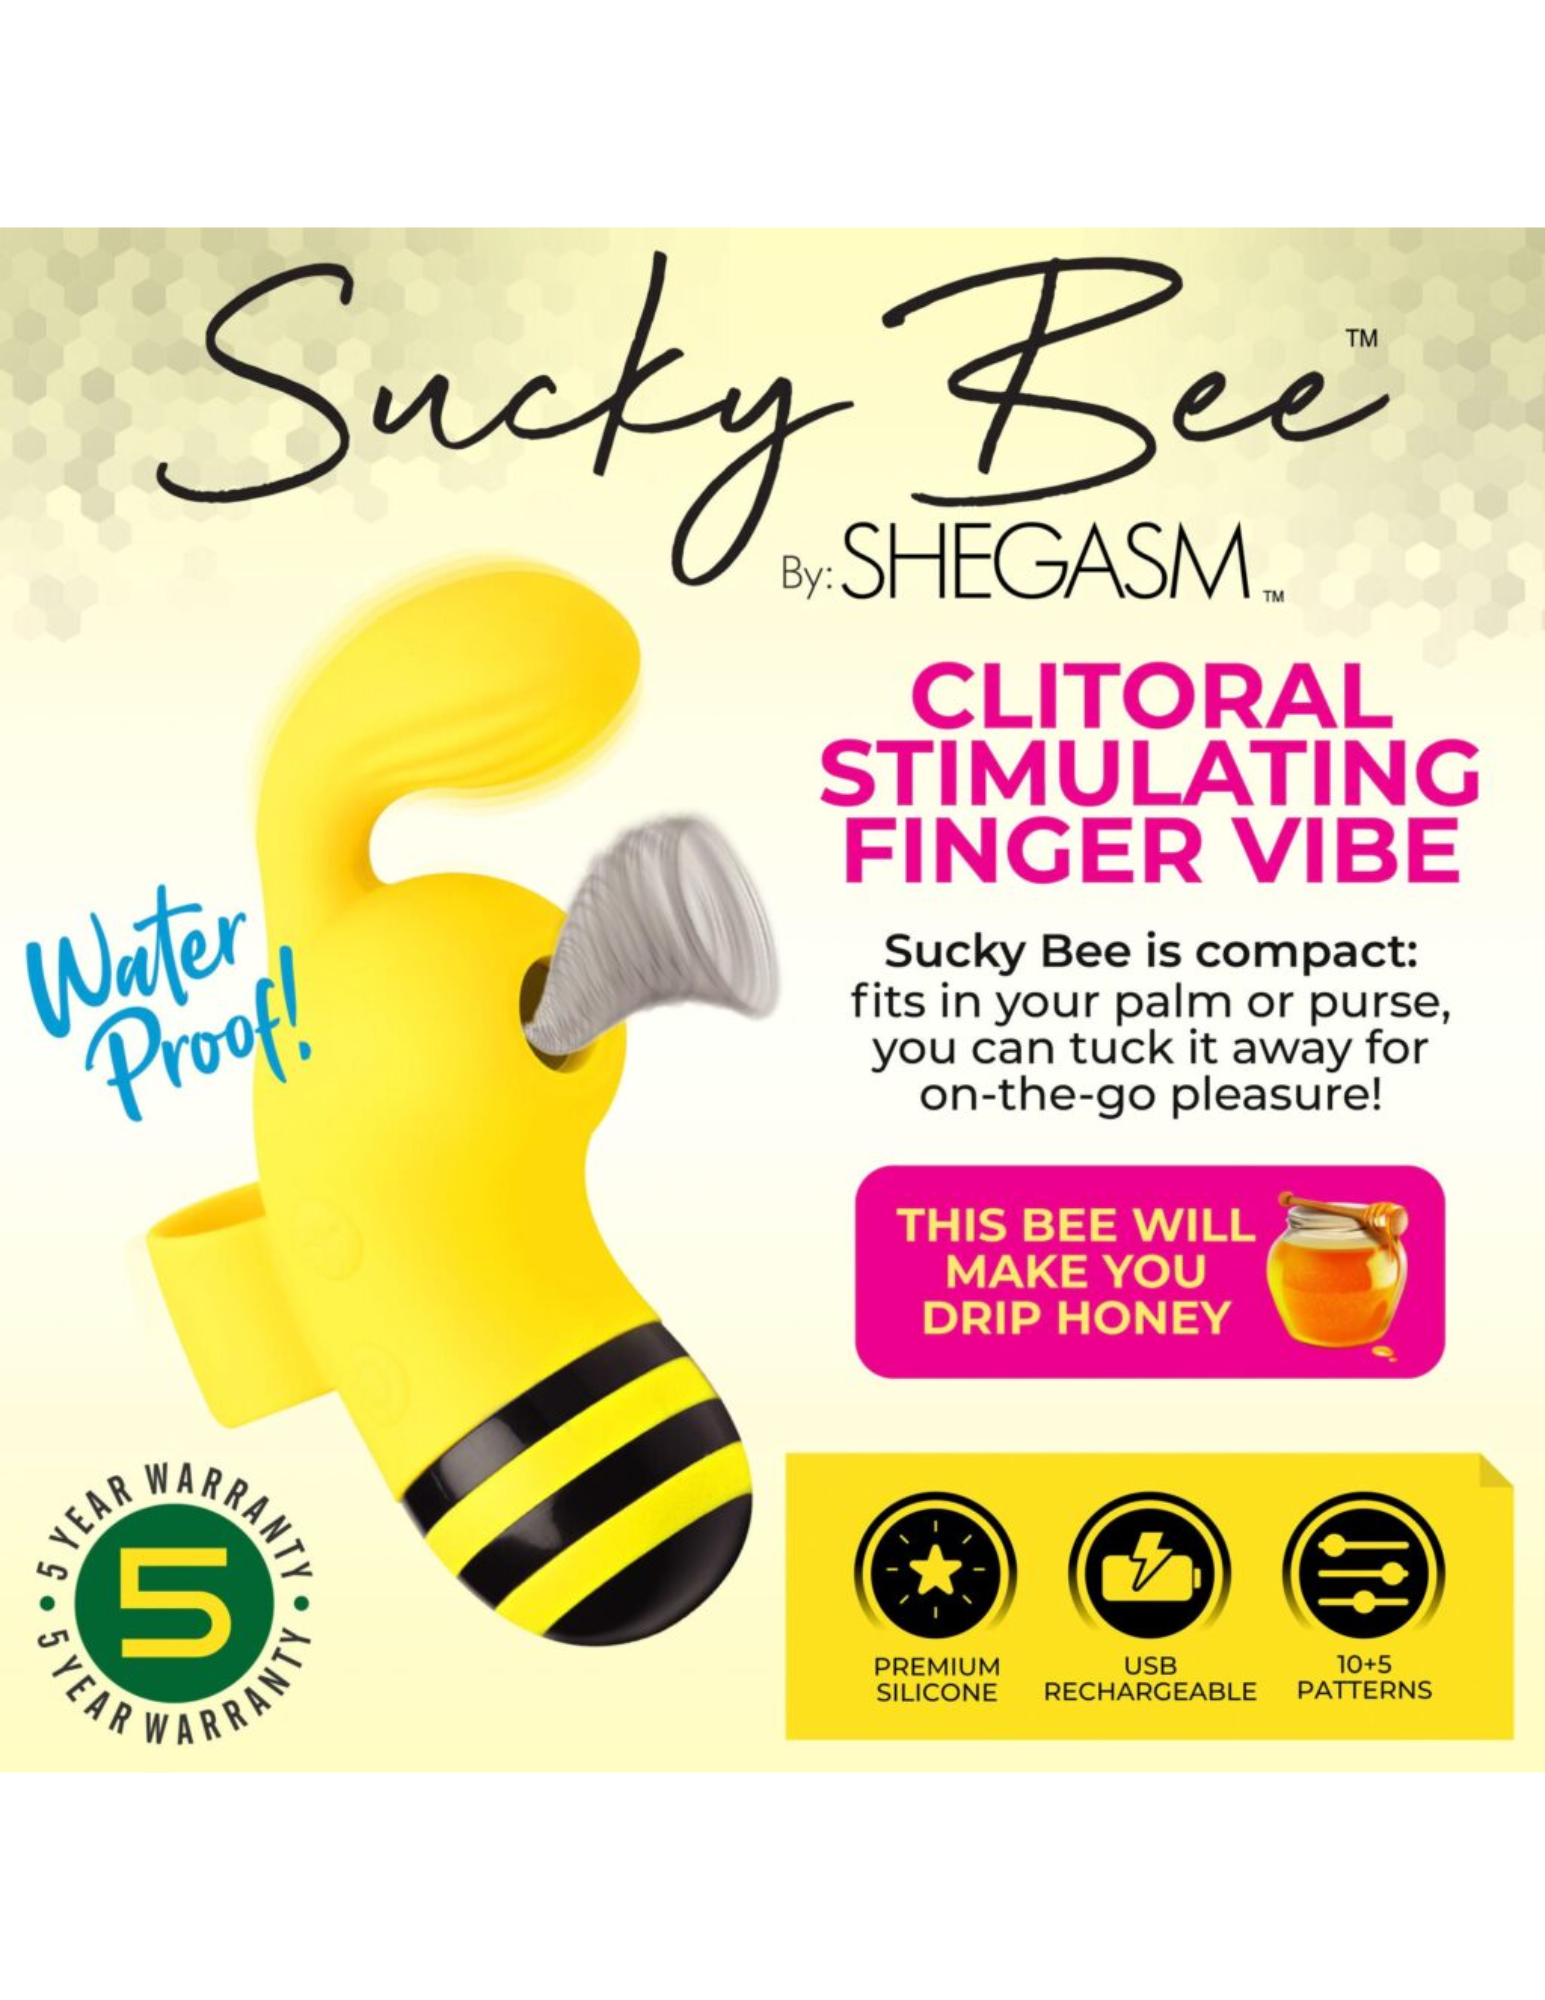 Sucky Bee ad featuring: "Sucky Bee is compact: fits in your palm or purse, you can tuck it away for on-the-go pleasure!" "This bee will make you drip honey". This product has a 5 year warranty, is made of premium silicone, USB rechargeable, and has 10+5 patterns.